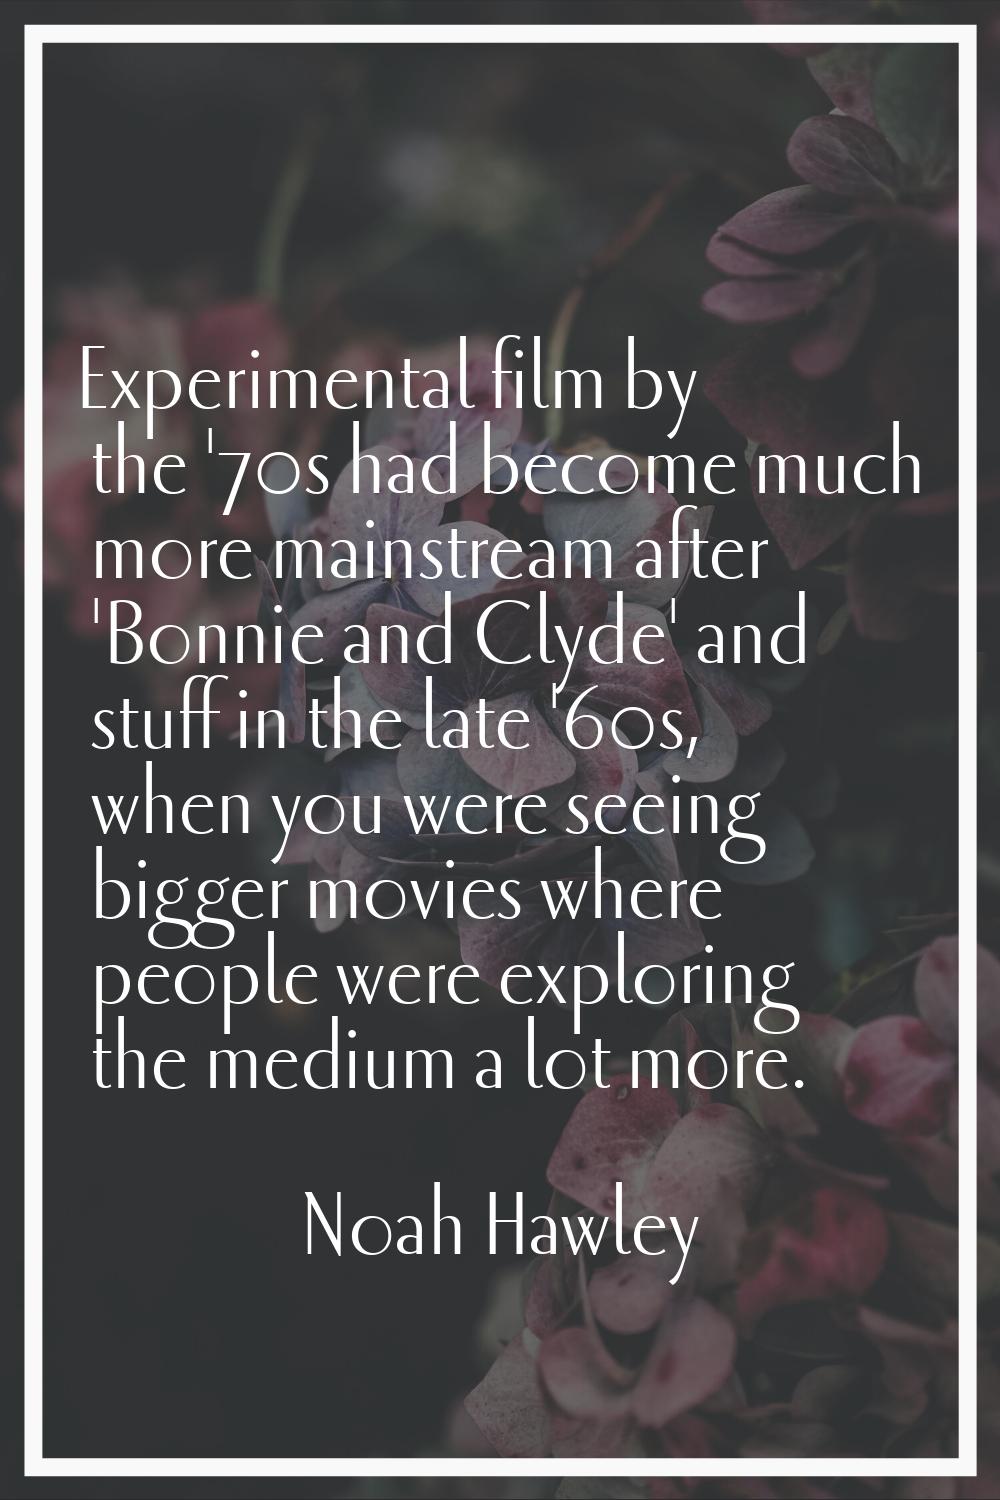 Experimental film by the '70s had become much more mainstream after 'Bonnie and Clyde' and stuff in